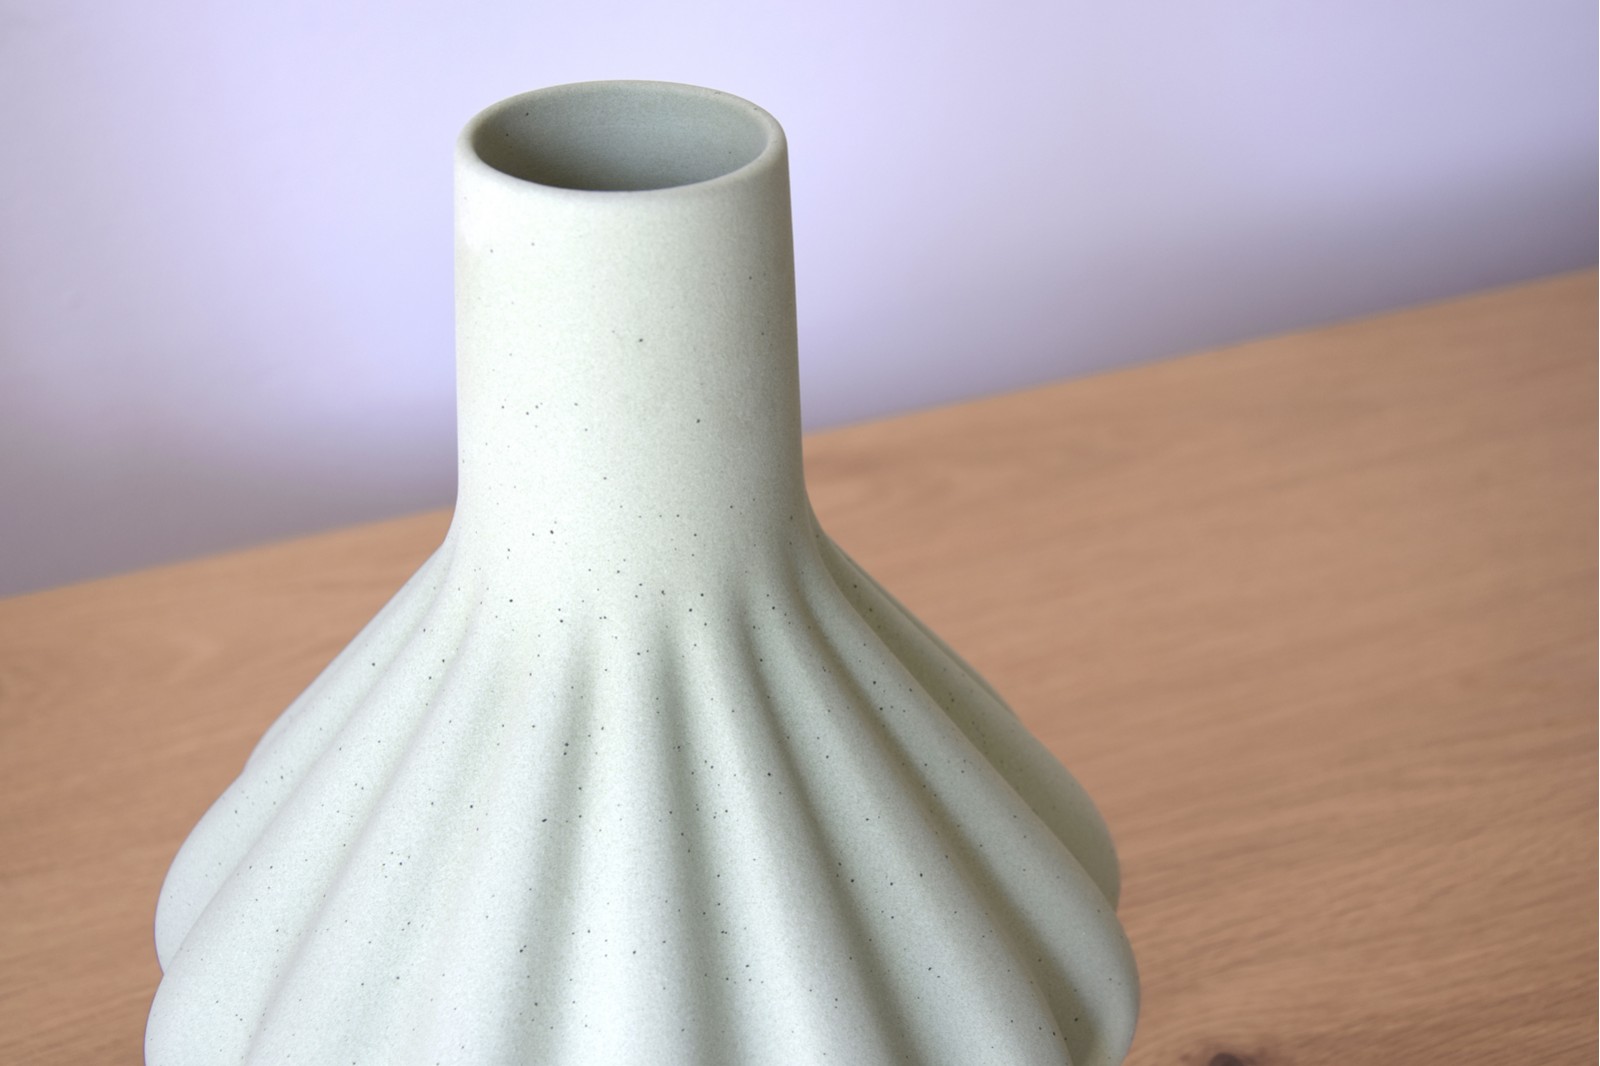 BELLOWS COLLECTION: TEXTURED CERAMIC VASES